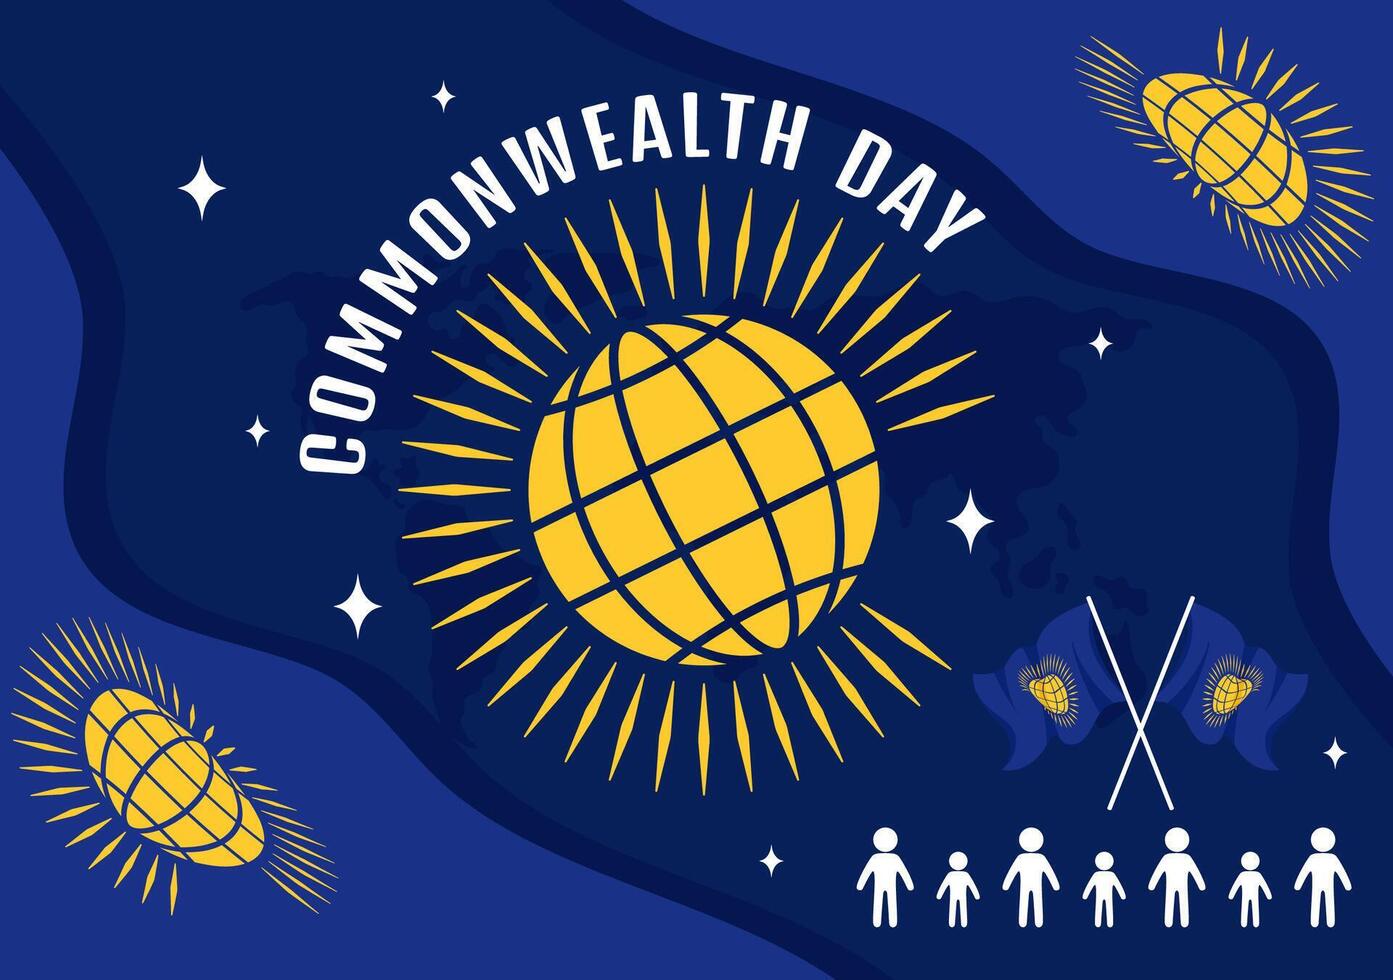 Commonwealth Day Vector Illustration on 24 may of Helps Guide Activities by Commonwealths Organizations with Waving Flag in Flat Cartoon Background